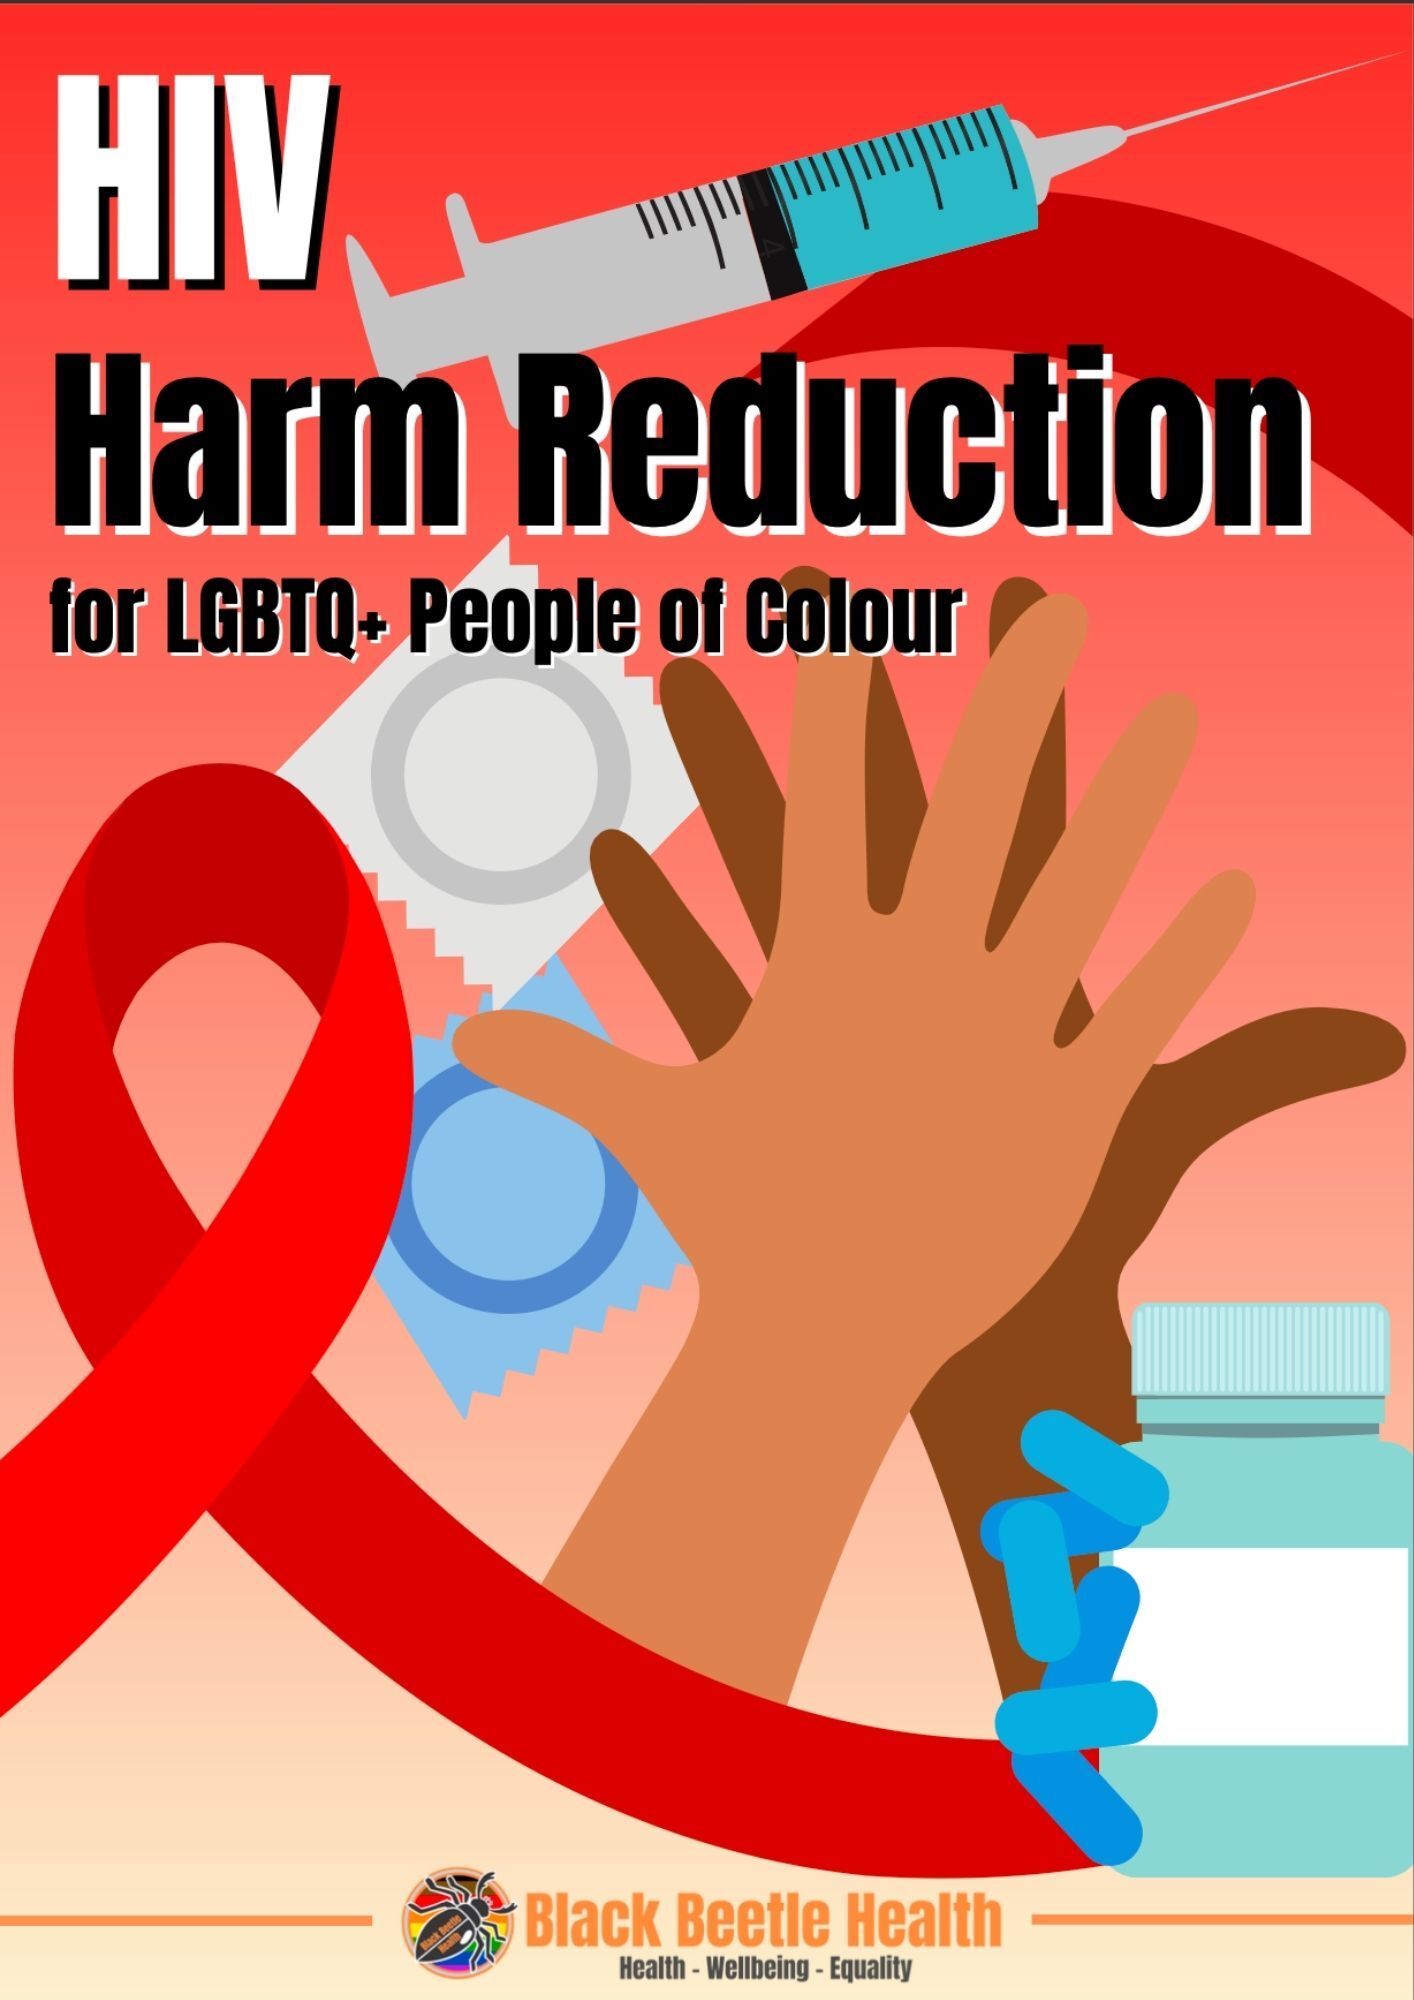 HIV harm reduction for LGBTQ+ people of colour